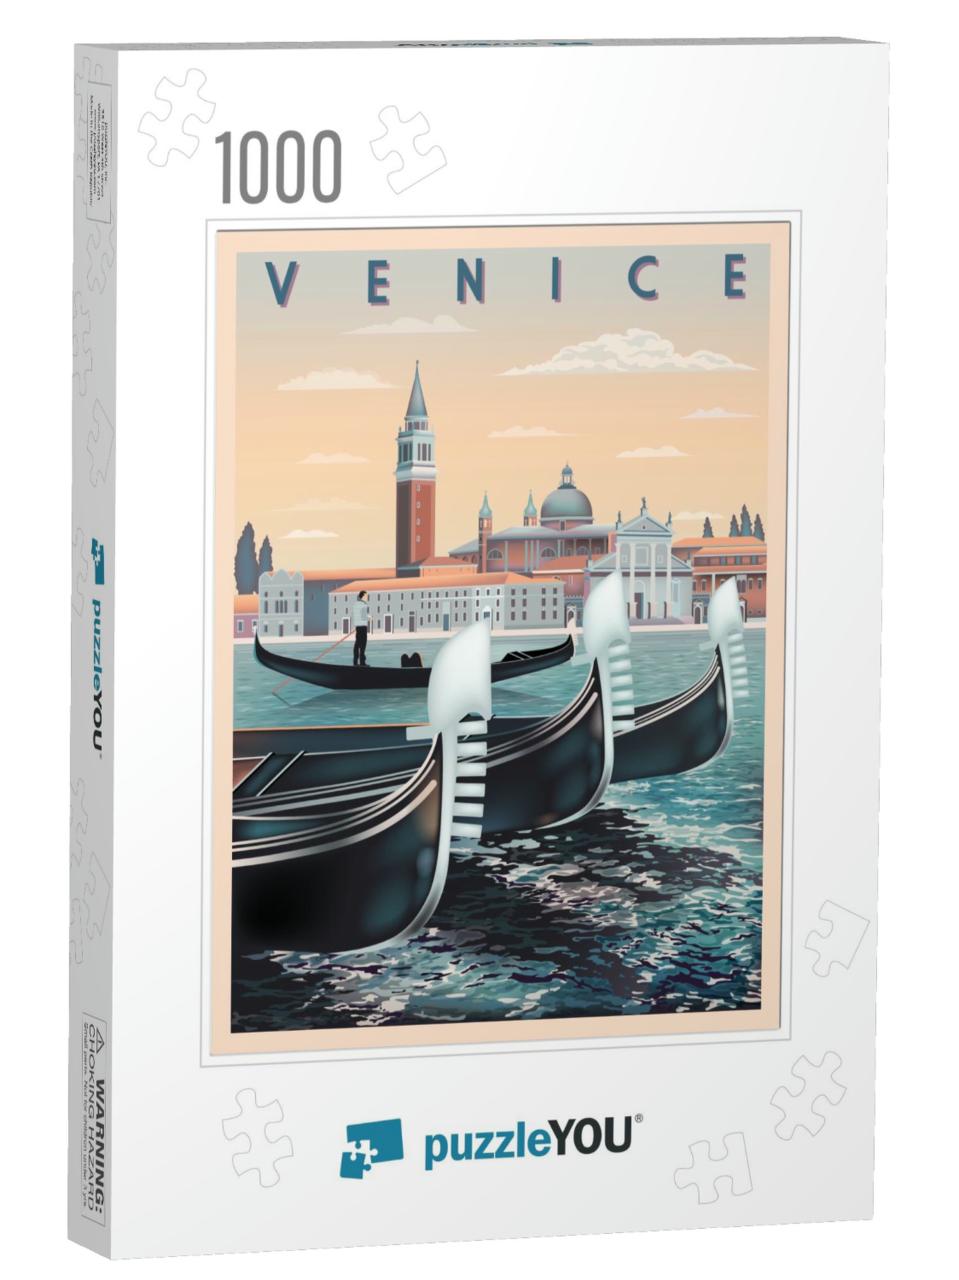 Early Morning in Venice, Italy. Travel or Post Card Templ... Jigsaw Puzzle with 1000 pieces